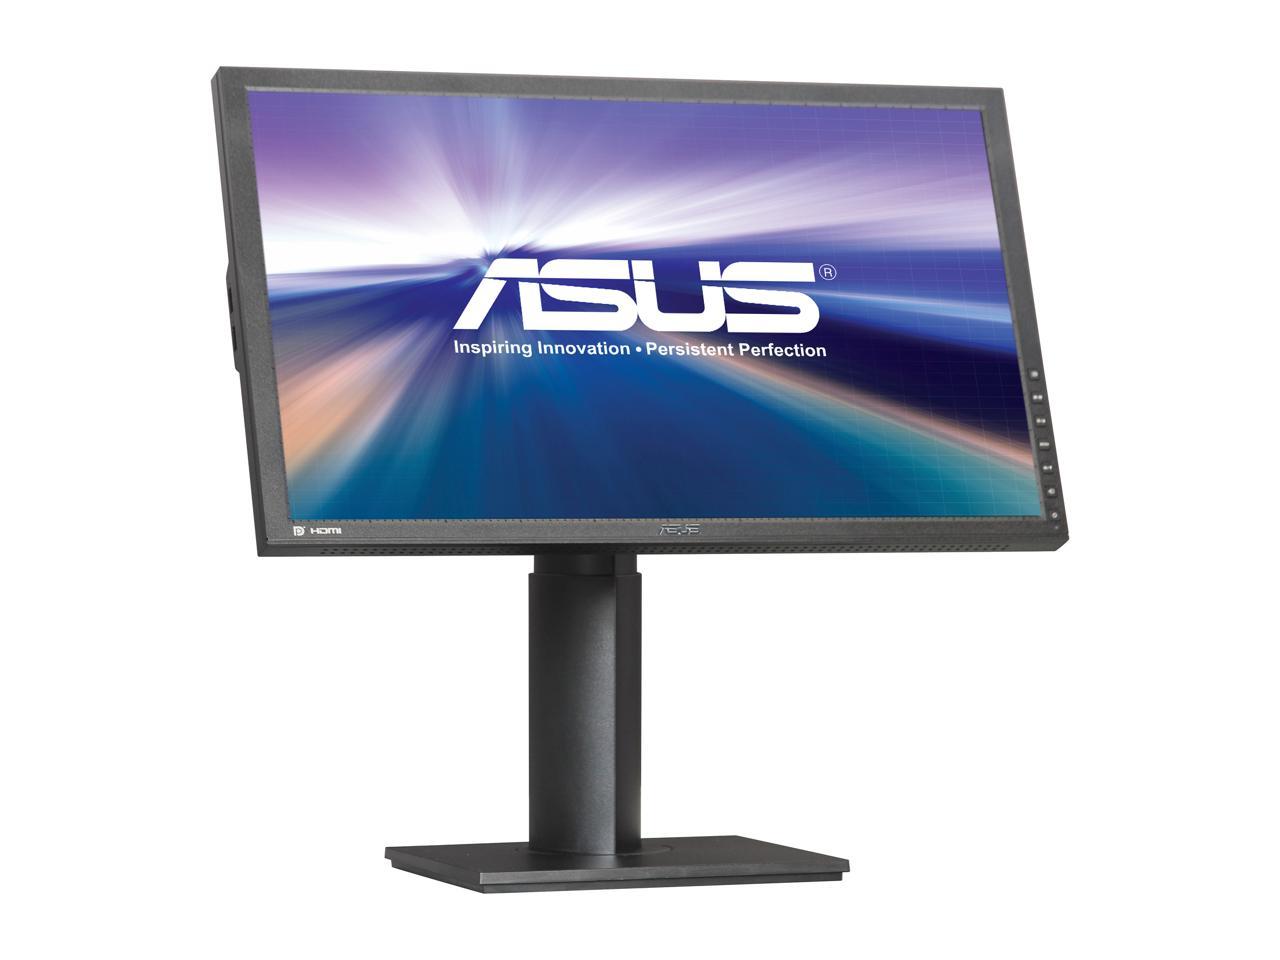 Asus PB Series PB238Q Black 6ms(GTG) IPS panel HDMI Widescreen LED Backlight Monitor,250 cd/m2 ,ASCR 80000000:1 , Built-in Speakers, Height and Pivot adjustable